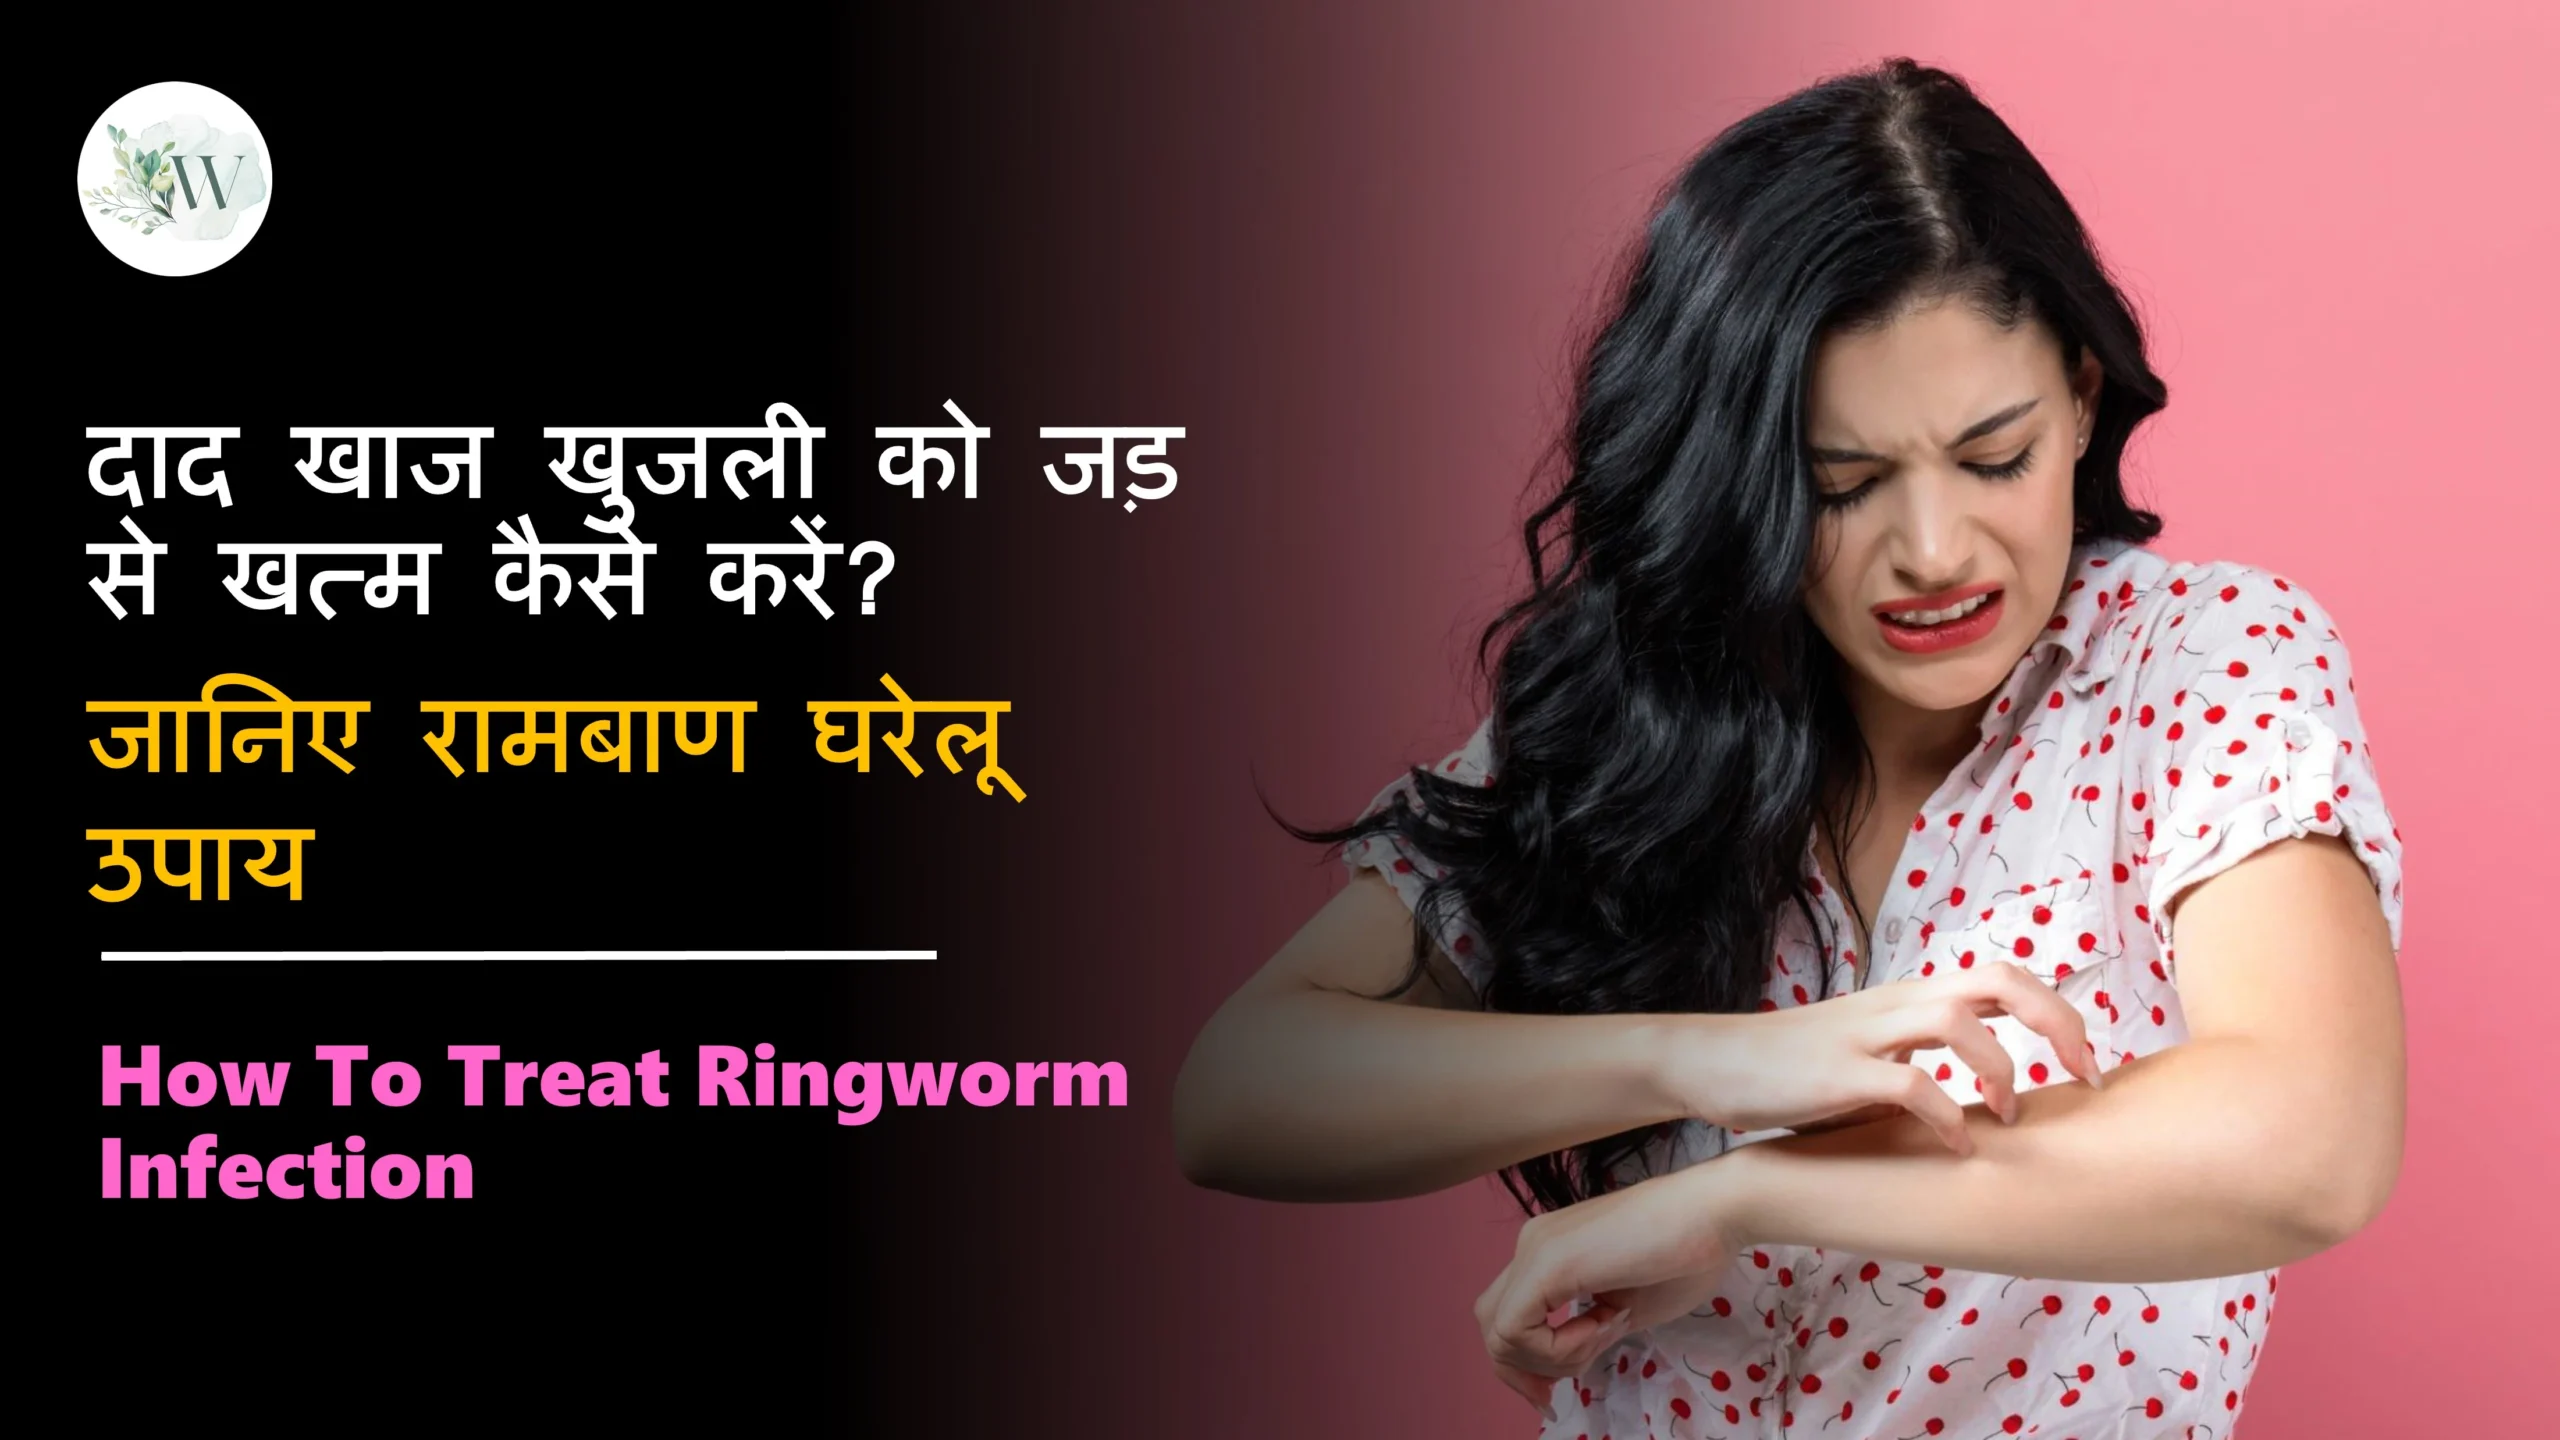 How To Treat Ringworm Infection